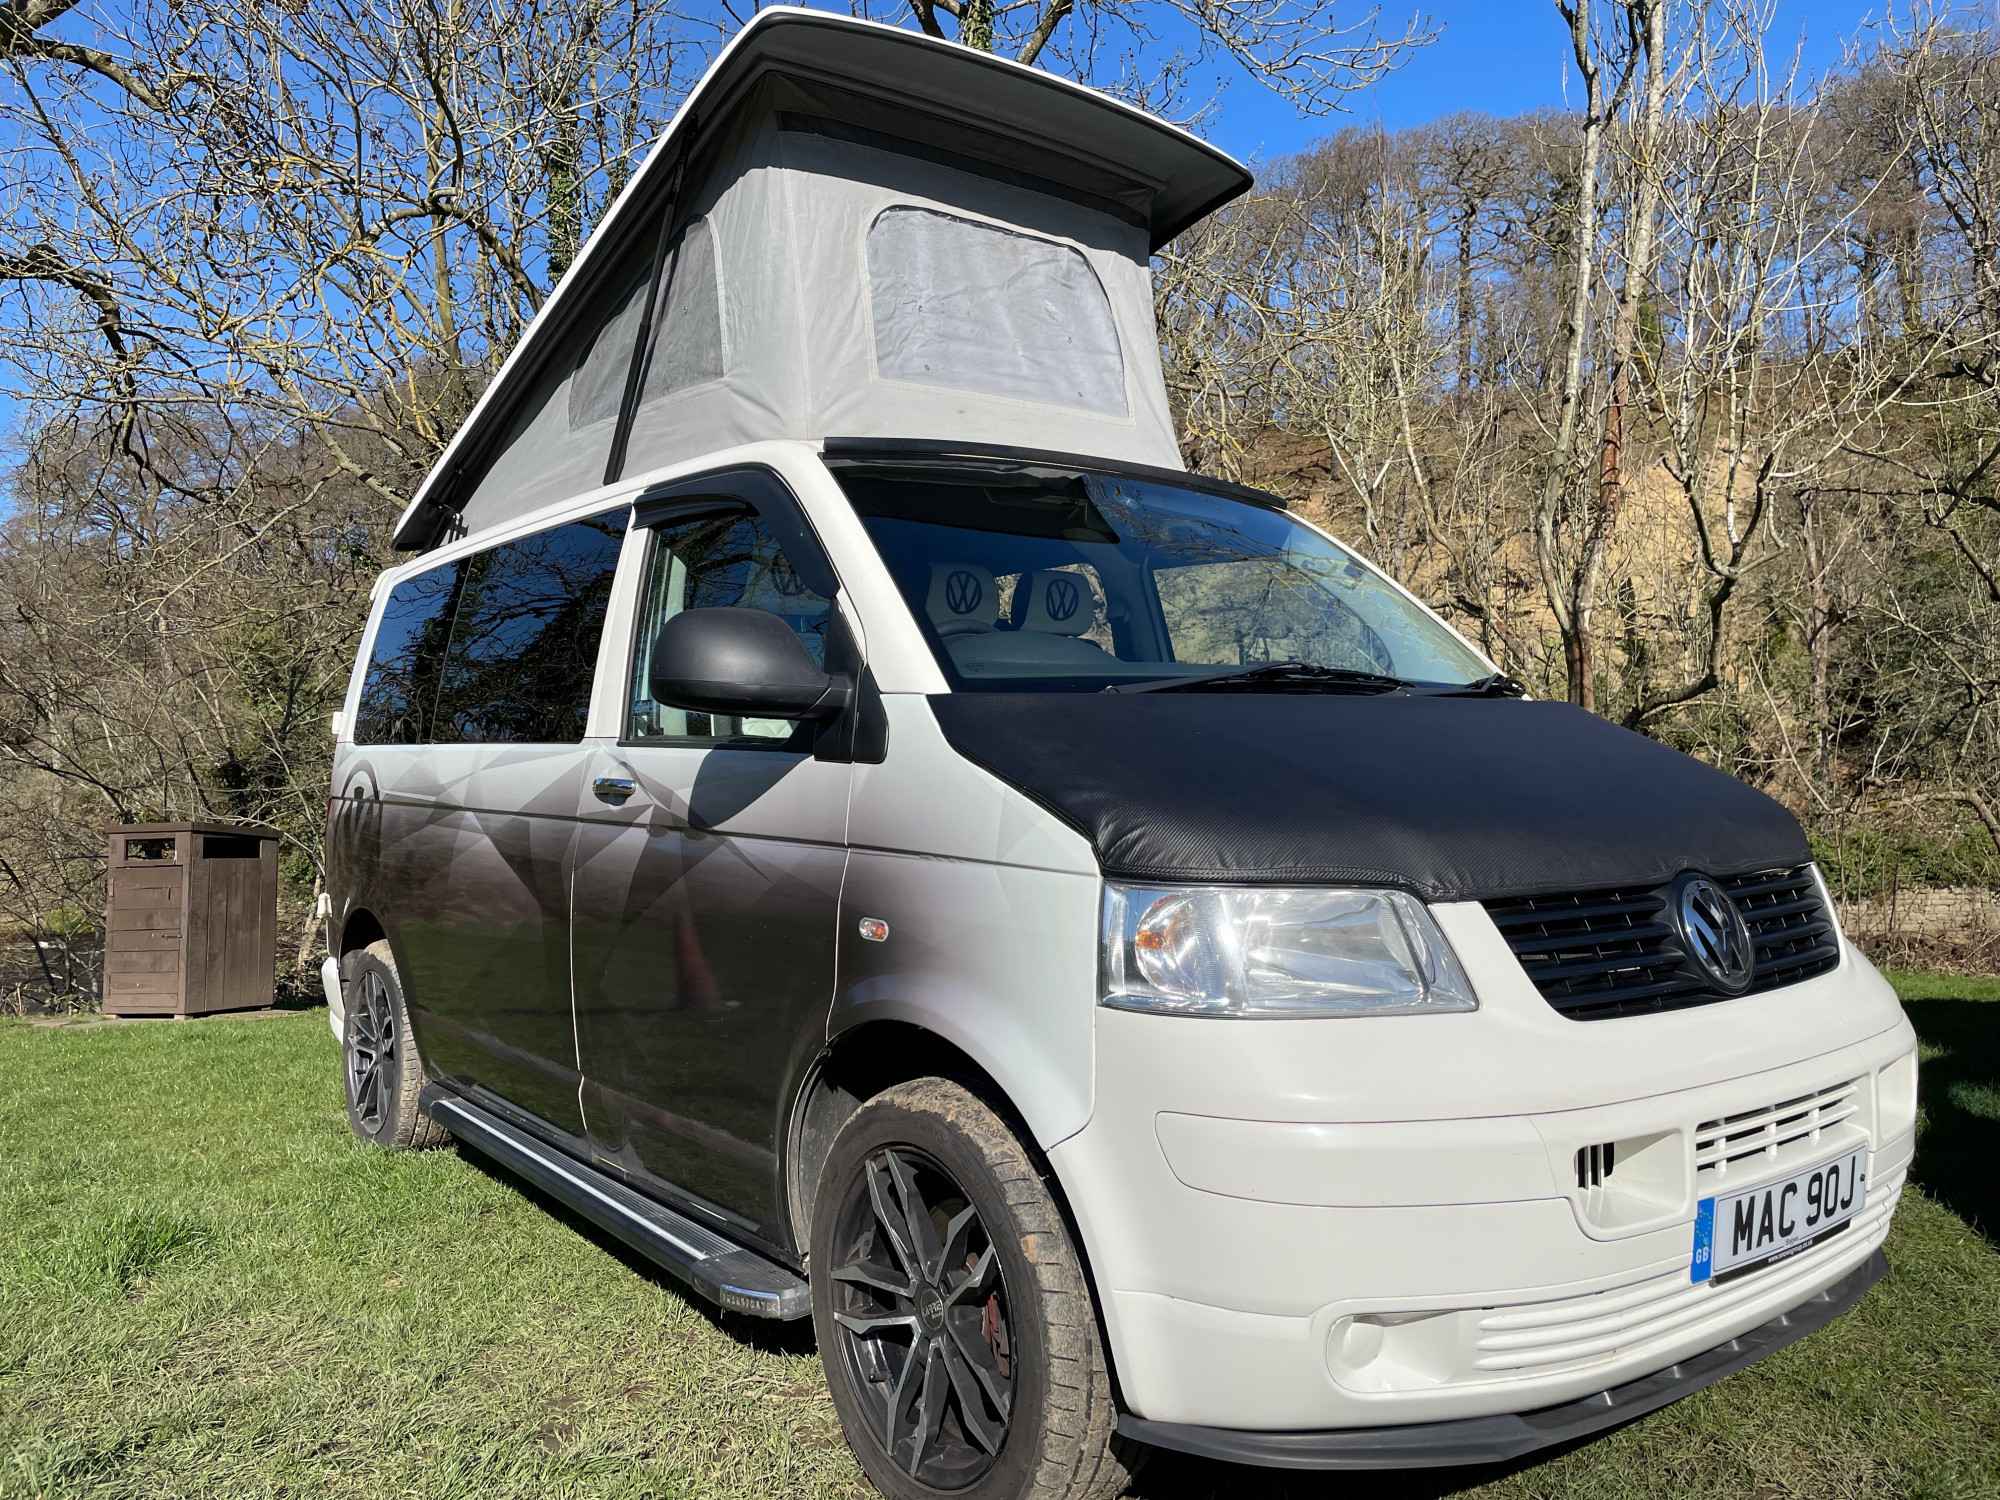 A VW T5 Campervan called Shadow and for hire in Chester-le-Street, England